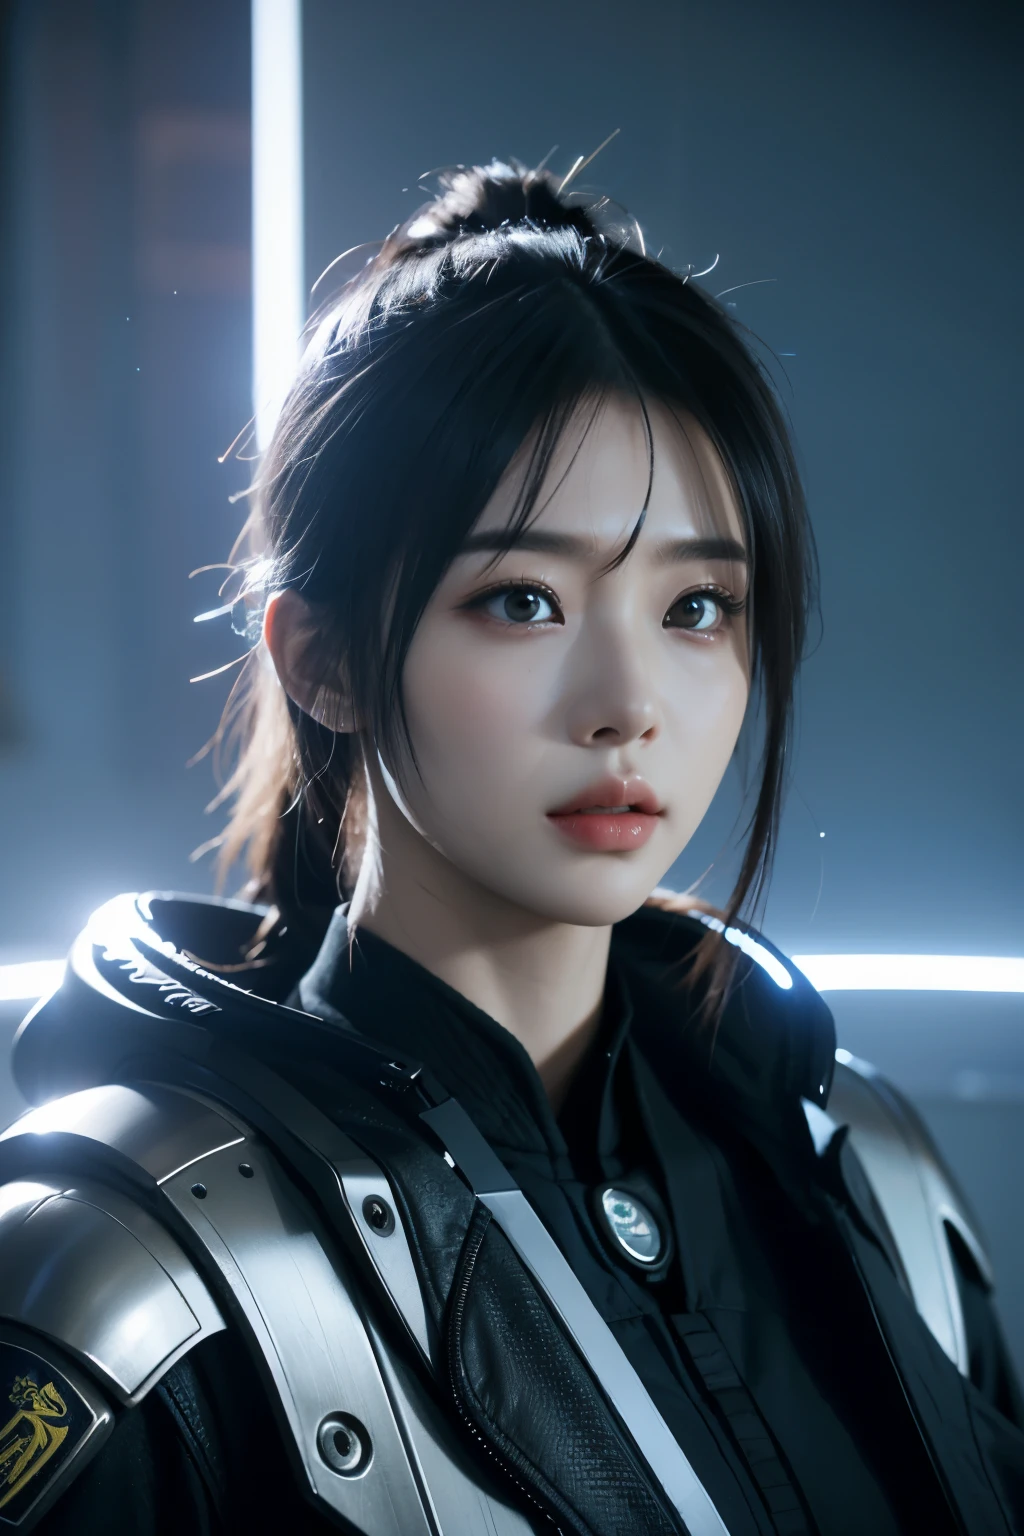 Game art，The best picture quality，Highest resolution，8k，((A bust photograph))，((Portrait))，(Rule of thirds)，Unreal Engine 5 rendering works， (The Girl of the Future)，(Female Warrior)， 22-year-old girl，(Female hackers)，(Ancient Oriental hairstyle)，(A beautiful eye full of detail)，(Big breasts)，(Eye shadow)，Elegant and charming，indifferent，((Frown))，(Battle wear full of futuristic tech，Clothing combines futuristic power armor and police uniforms，The garments are adorned with glittering patterns and badges)，Cyberpunk Characters，Future Style， Photo poses，City background，Movie lights，Ray tracing，Game CG，((3D Unreal Engine))，oc rendering reflection pattern